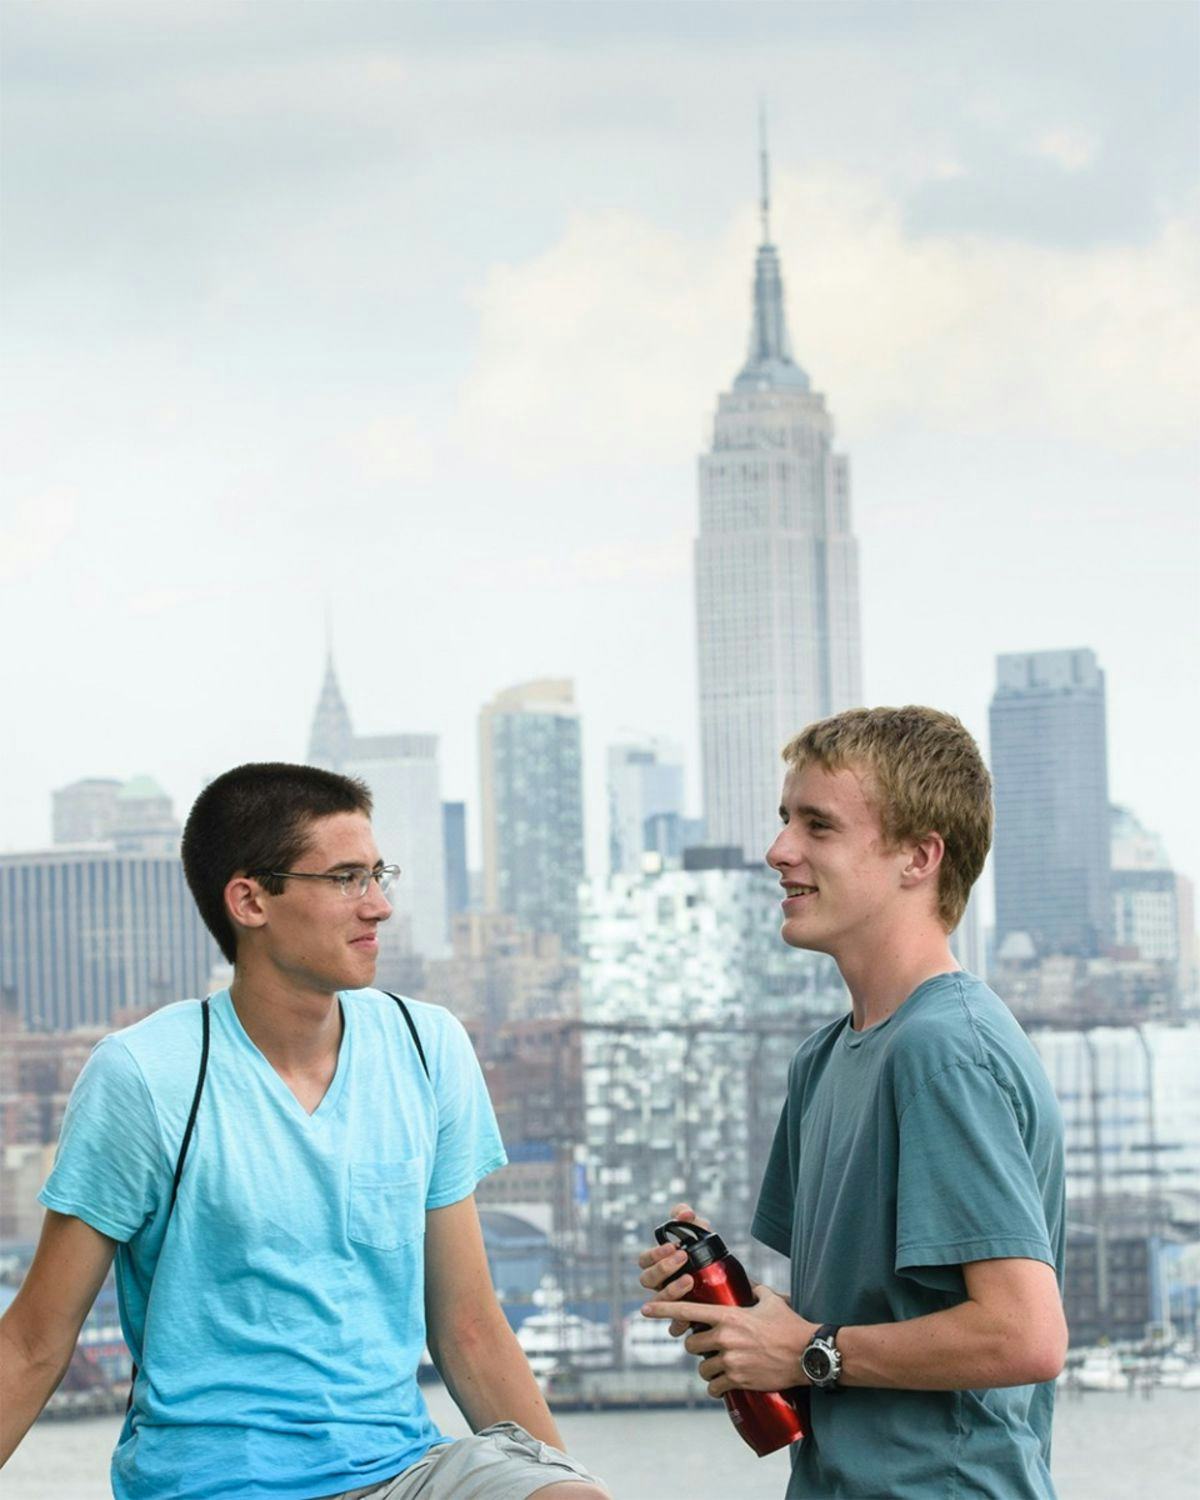 Students standing in front of the Empire State Building